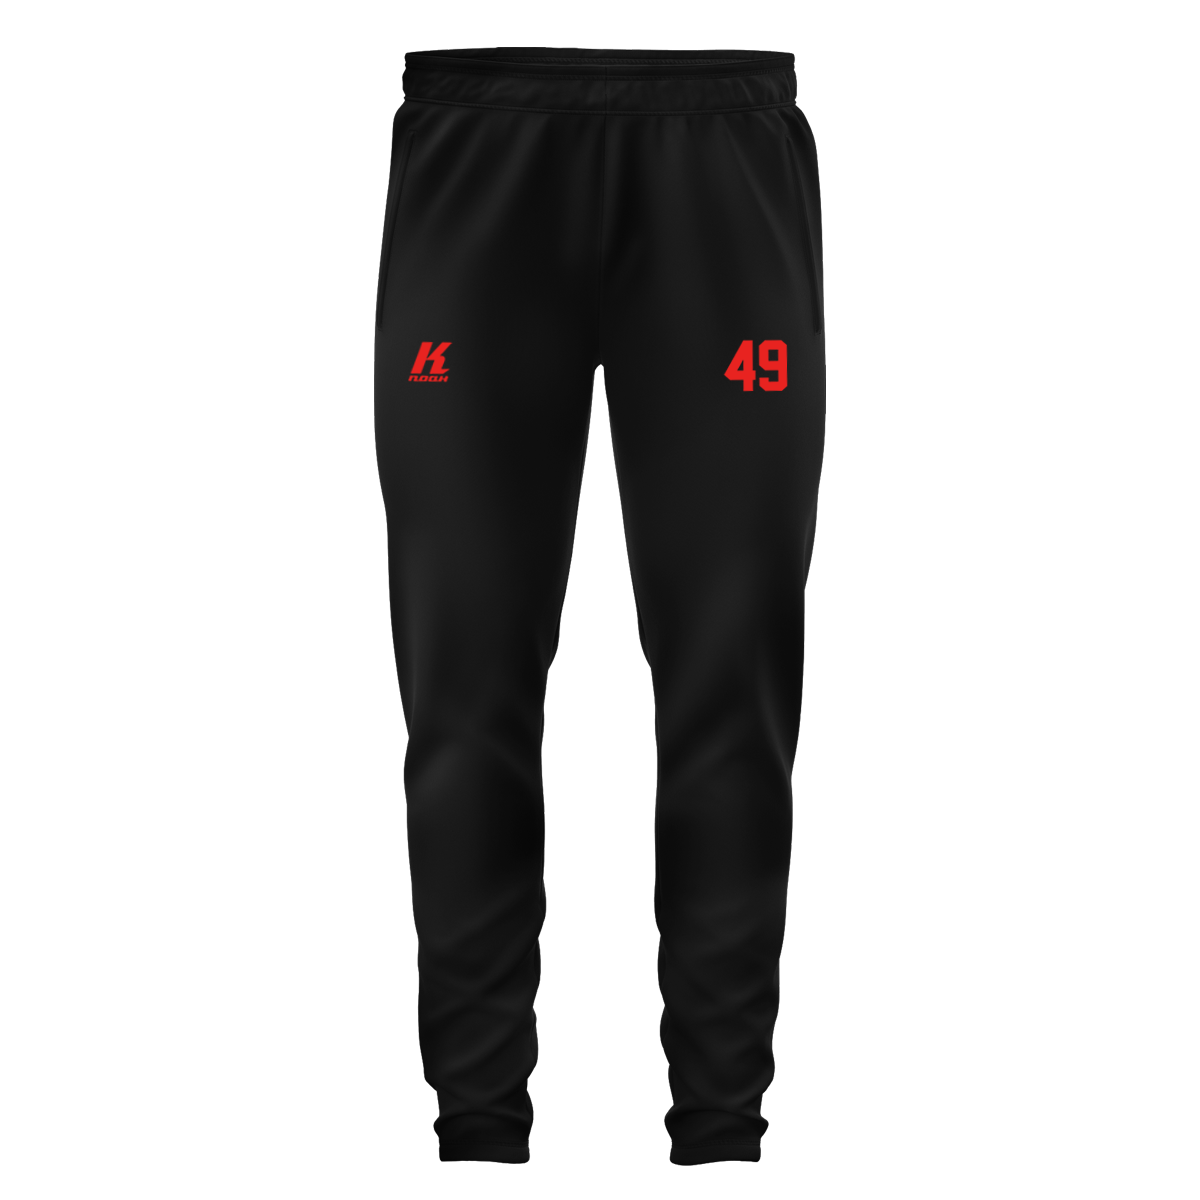 Warriors Skinny Pant with Playernumber/Initials